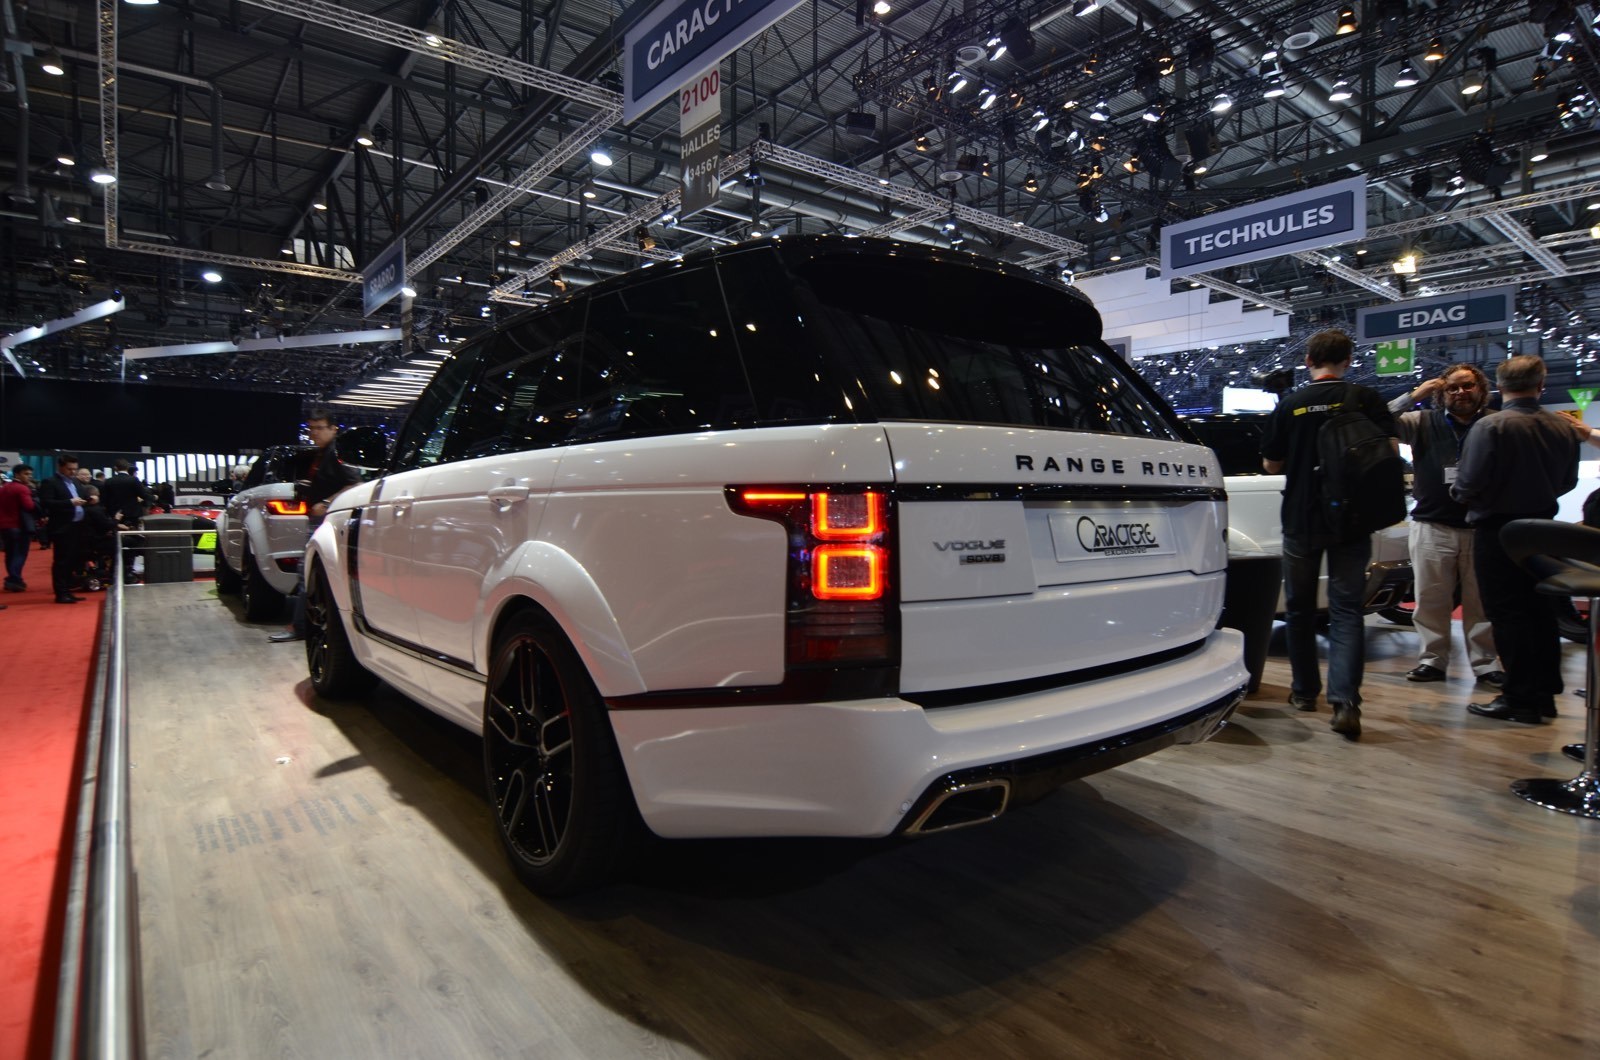 images-products-1-7456-232987936-Caracture-Range-Rover-at-Geneva-Motor-Show-20164.jpg